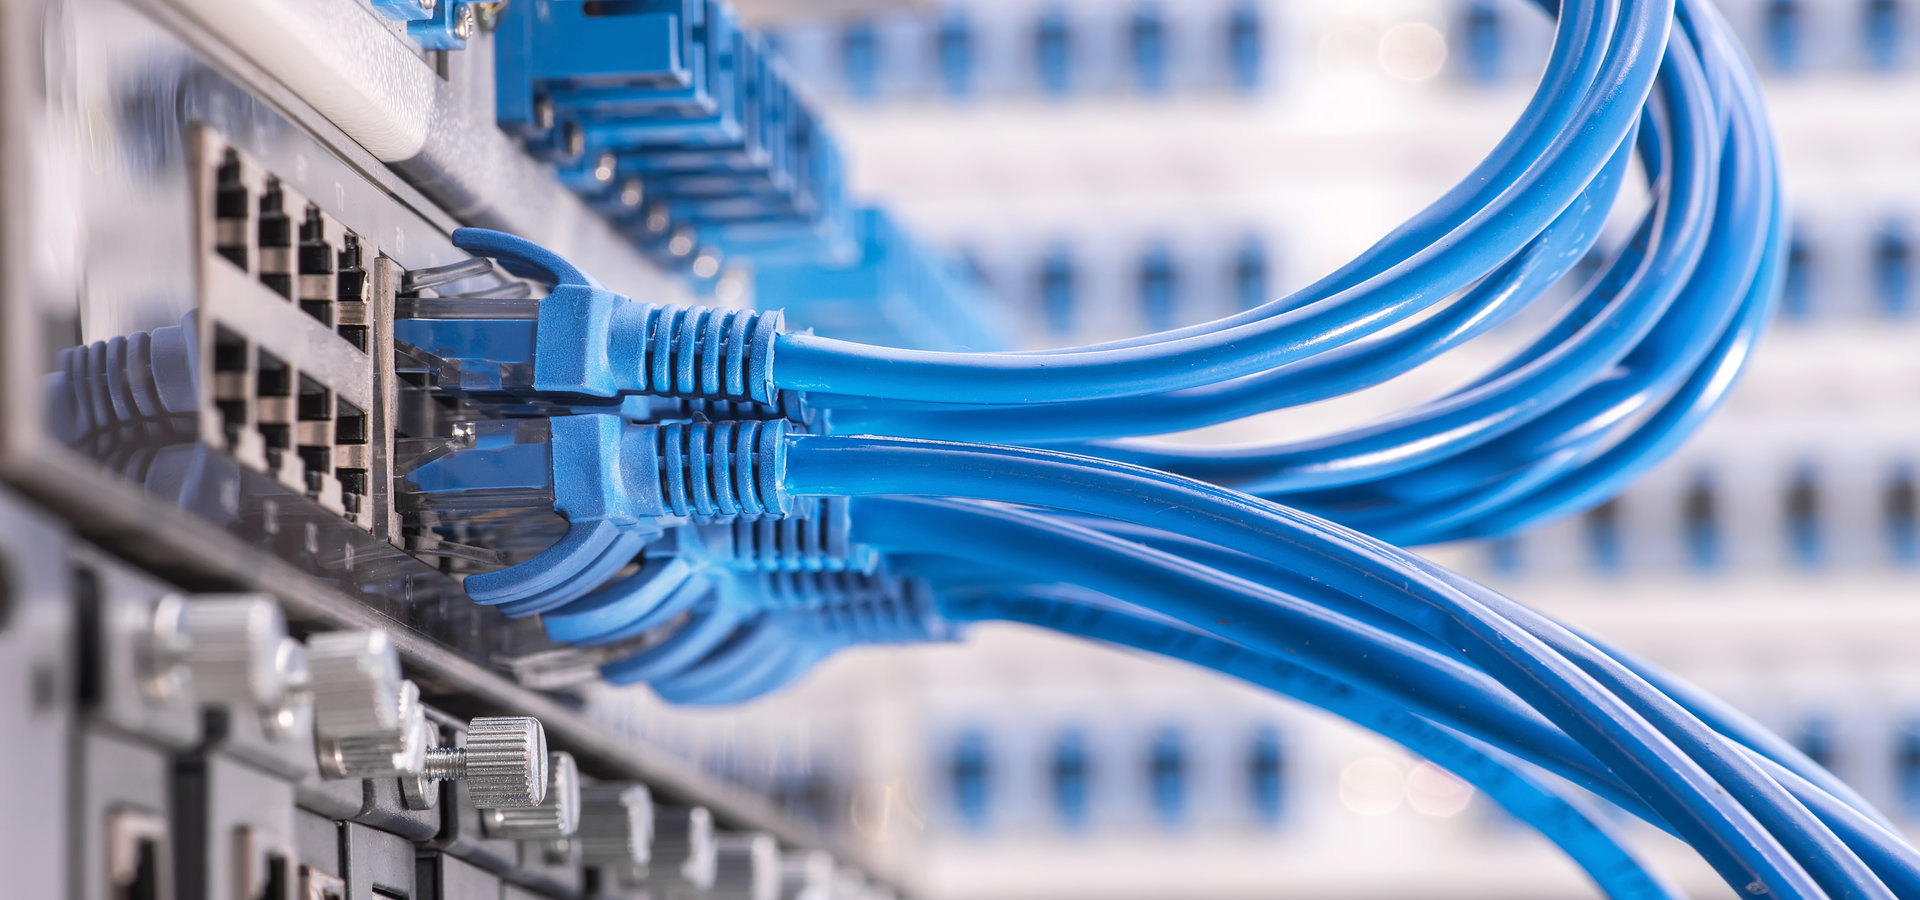 Network switches, routers, cabling, a closeup. A communications and/or IT themed stock photo.